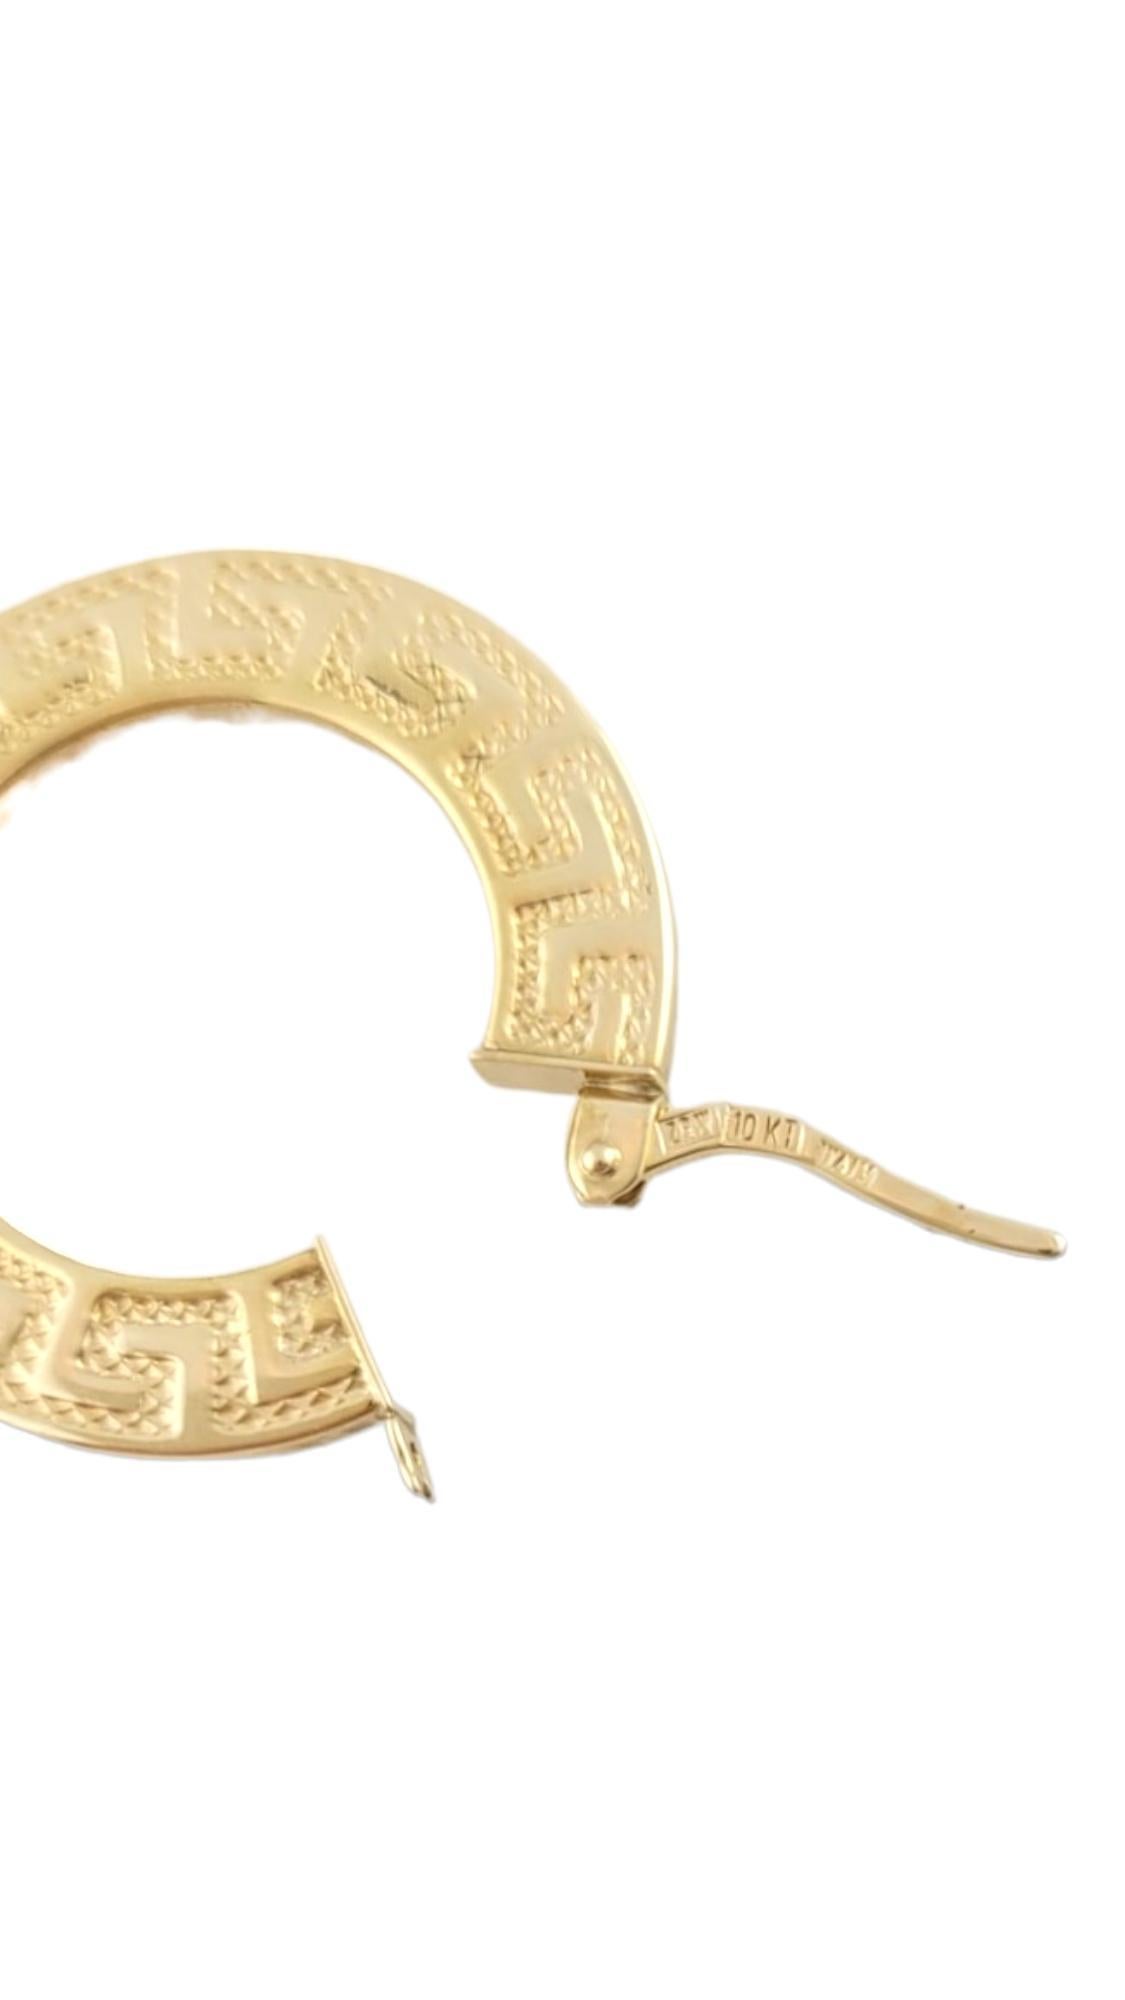 Vintage 10K Yellow Gold Hoop Aztec Design Earrings #16071 In Good Condition For Sale In Washington Depot, CT